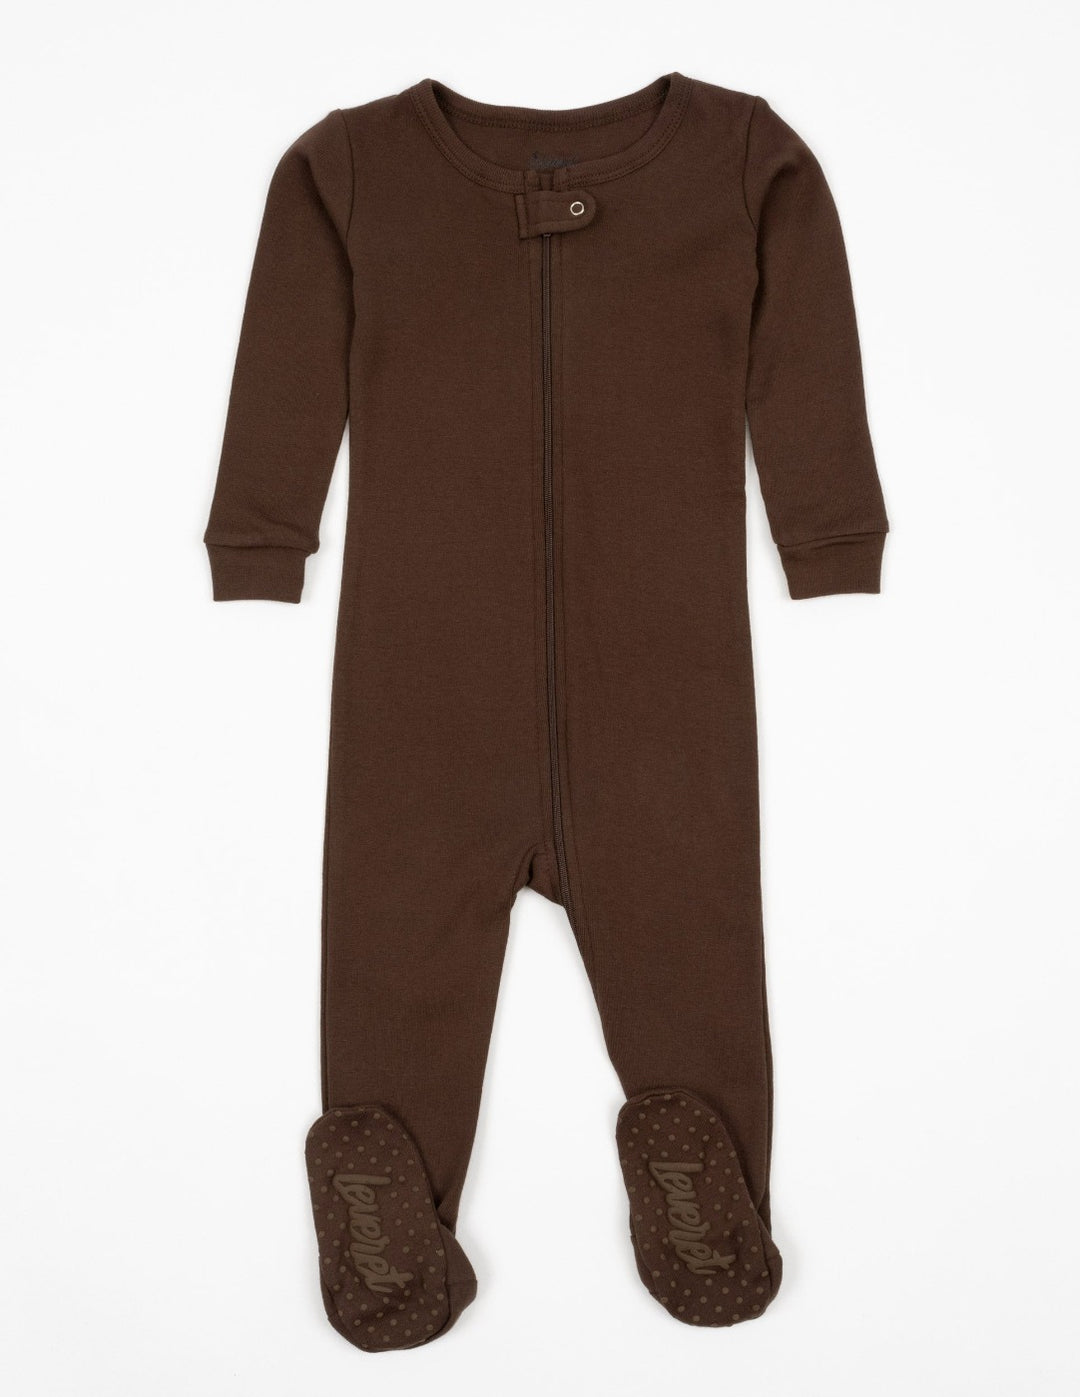 solid color brown baby footed pajama